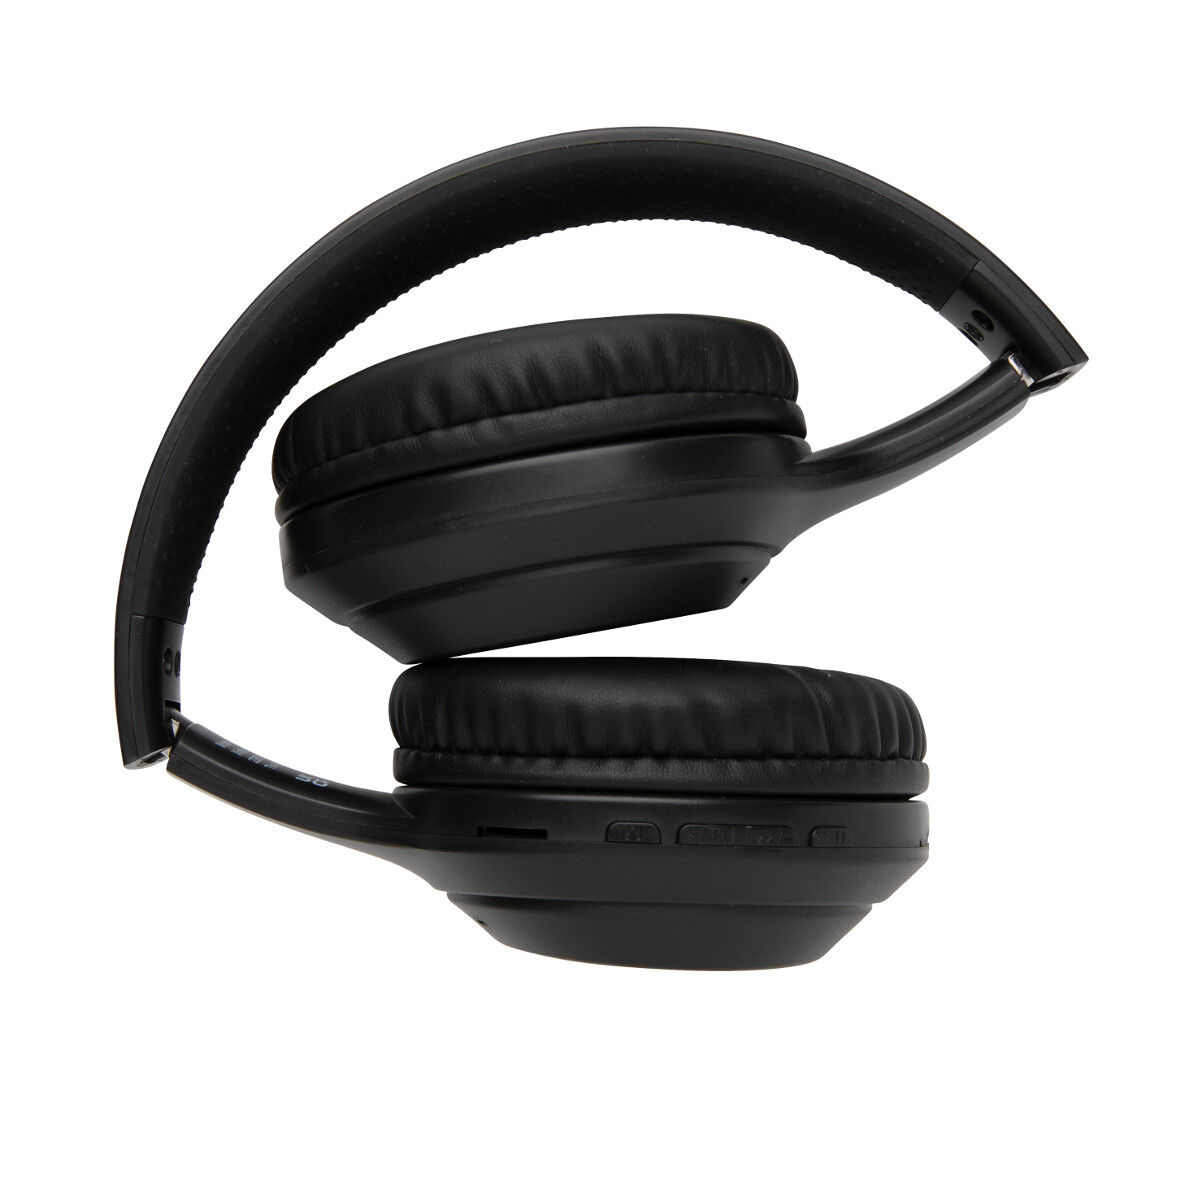 Recycled ABS Plastic Headphones (folded)